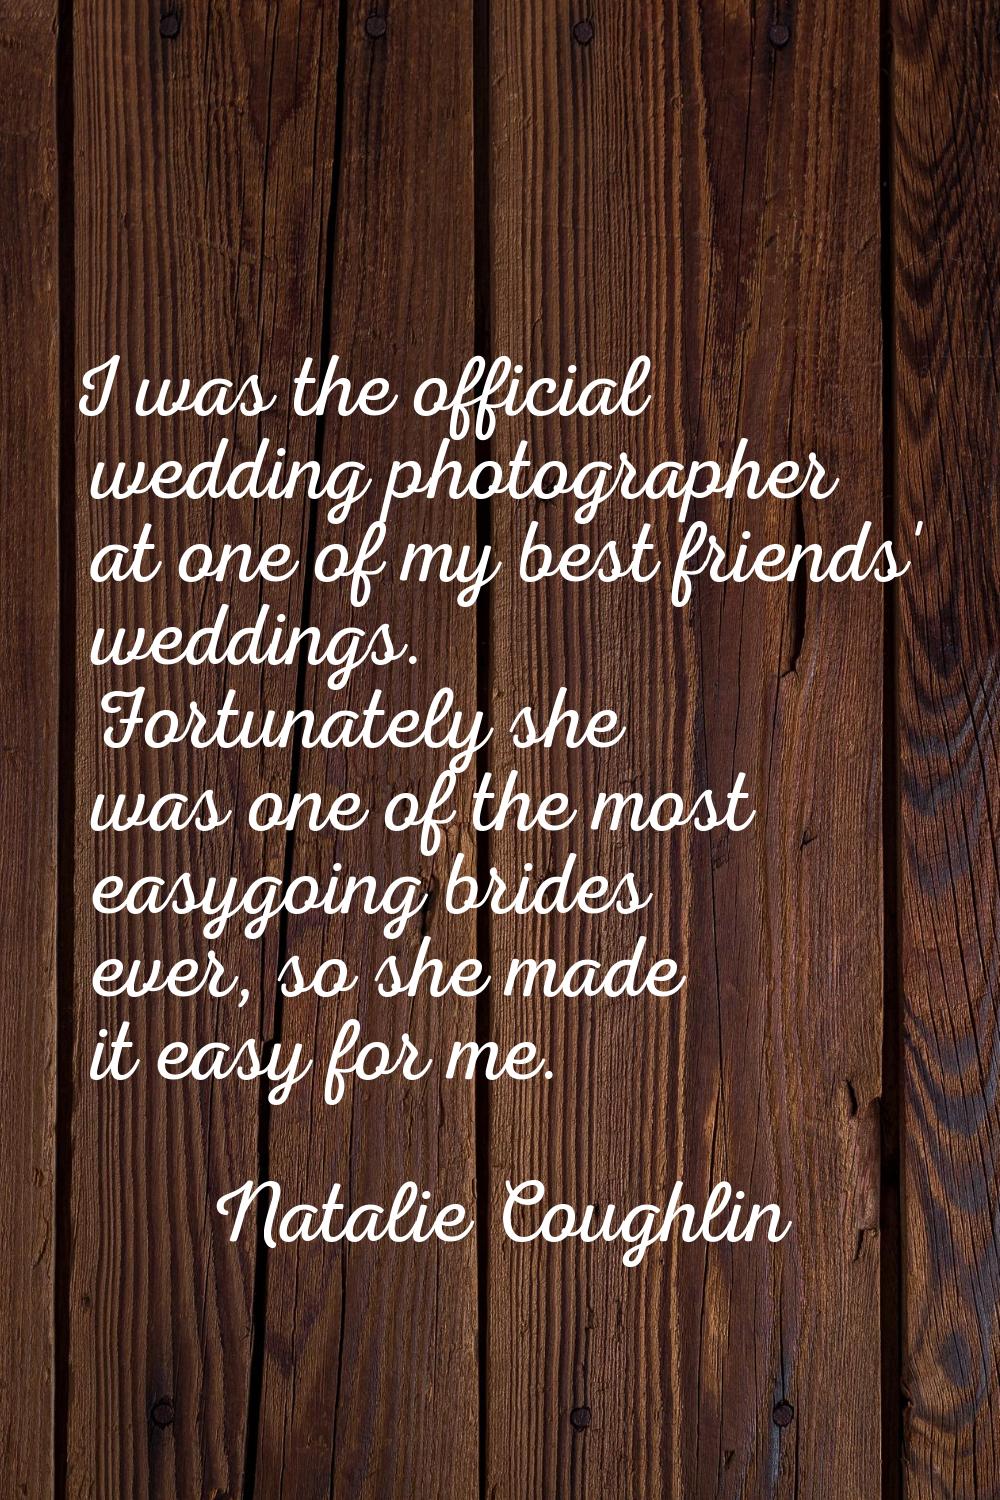 I was the official wedding photographer at one of my best friends' weddings. Fortunately she was on